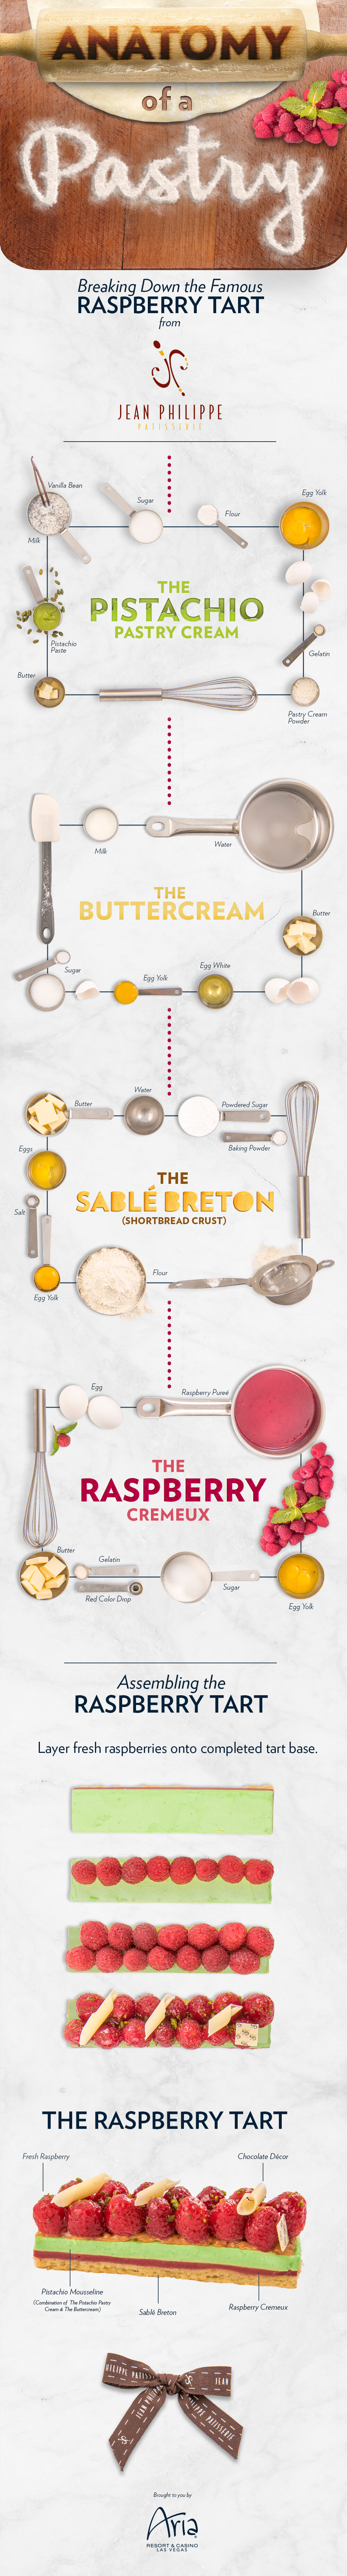 Anatomy of a Pastry Infographic